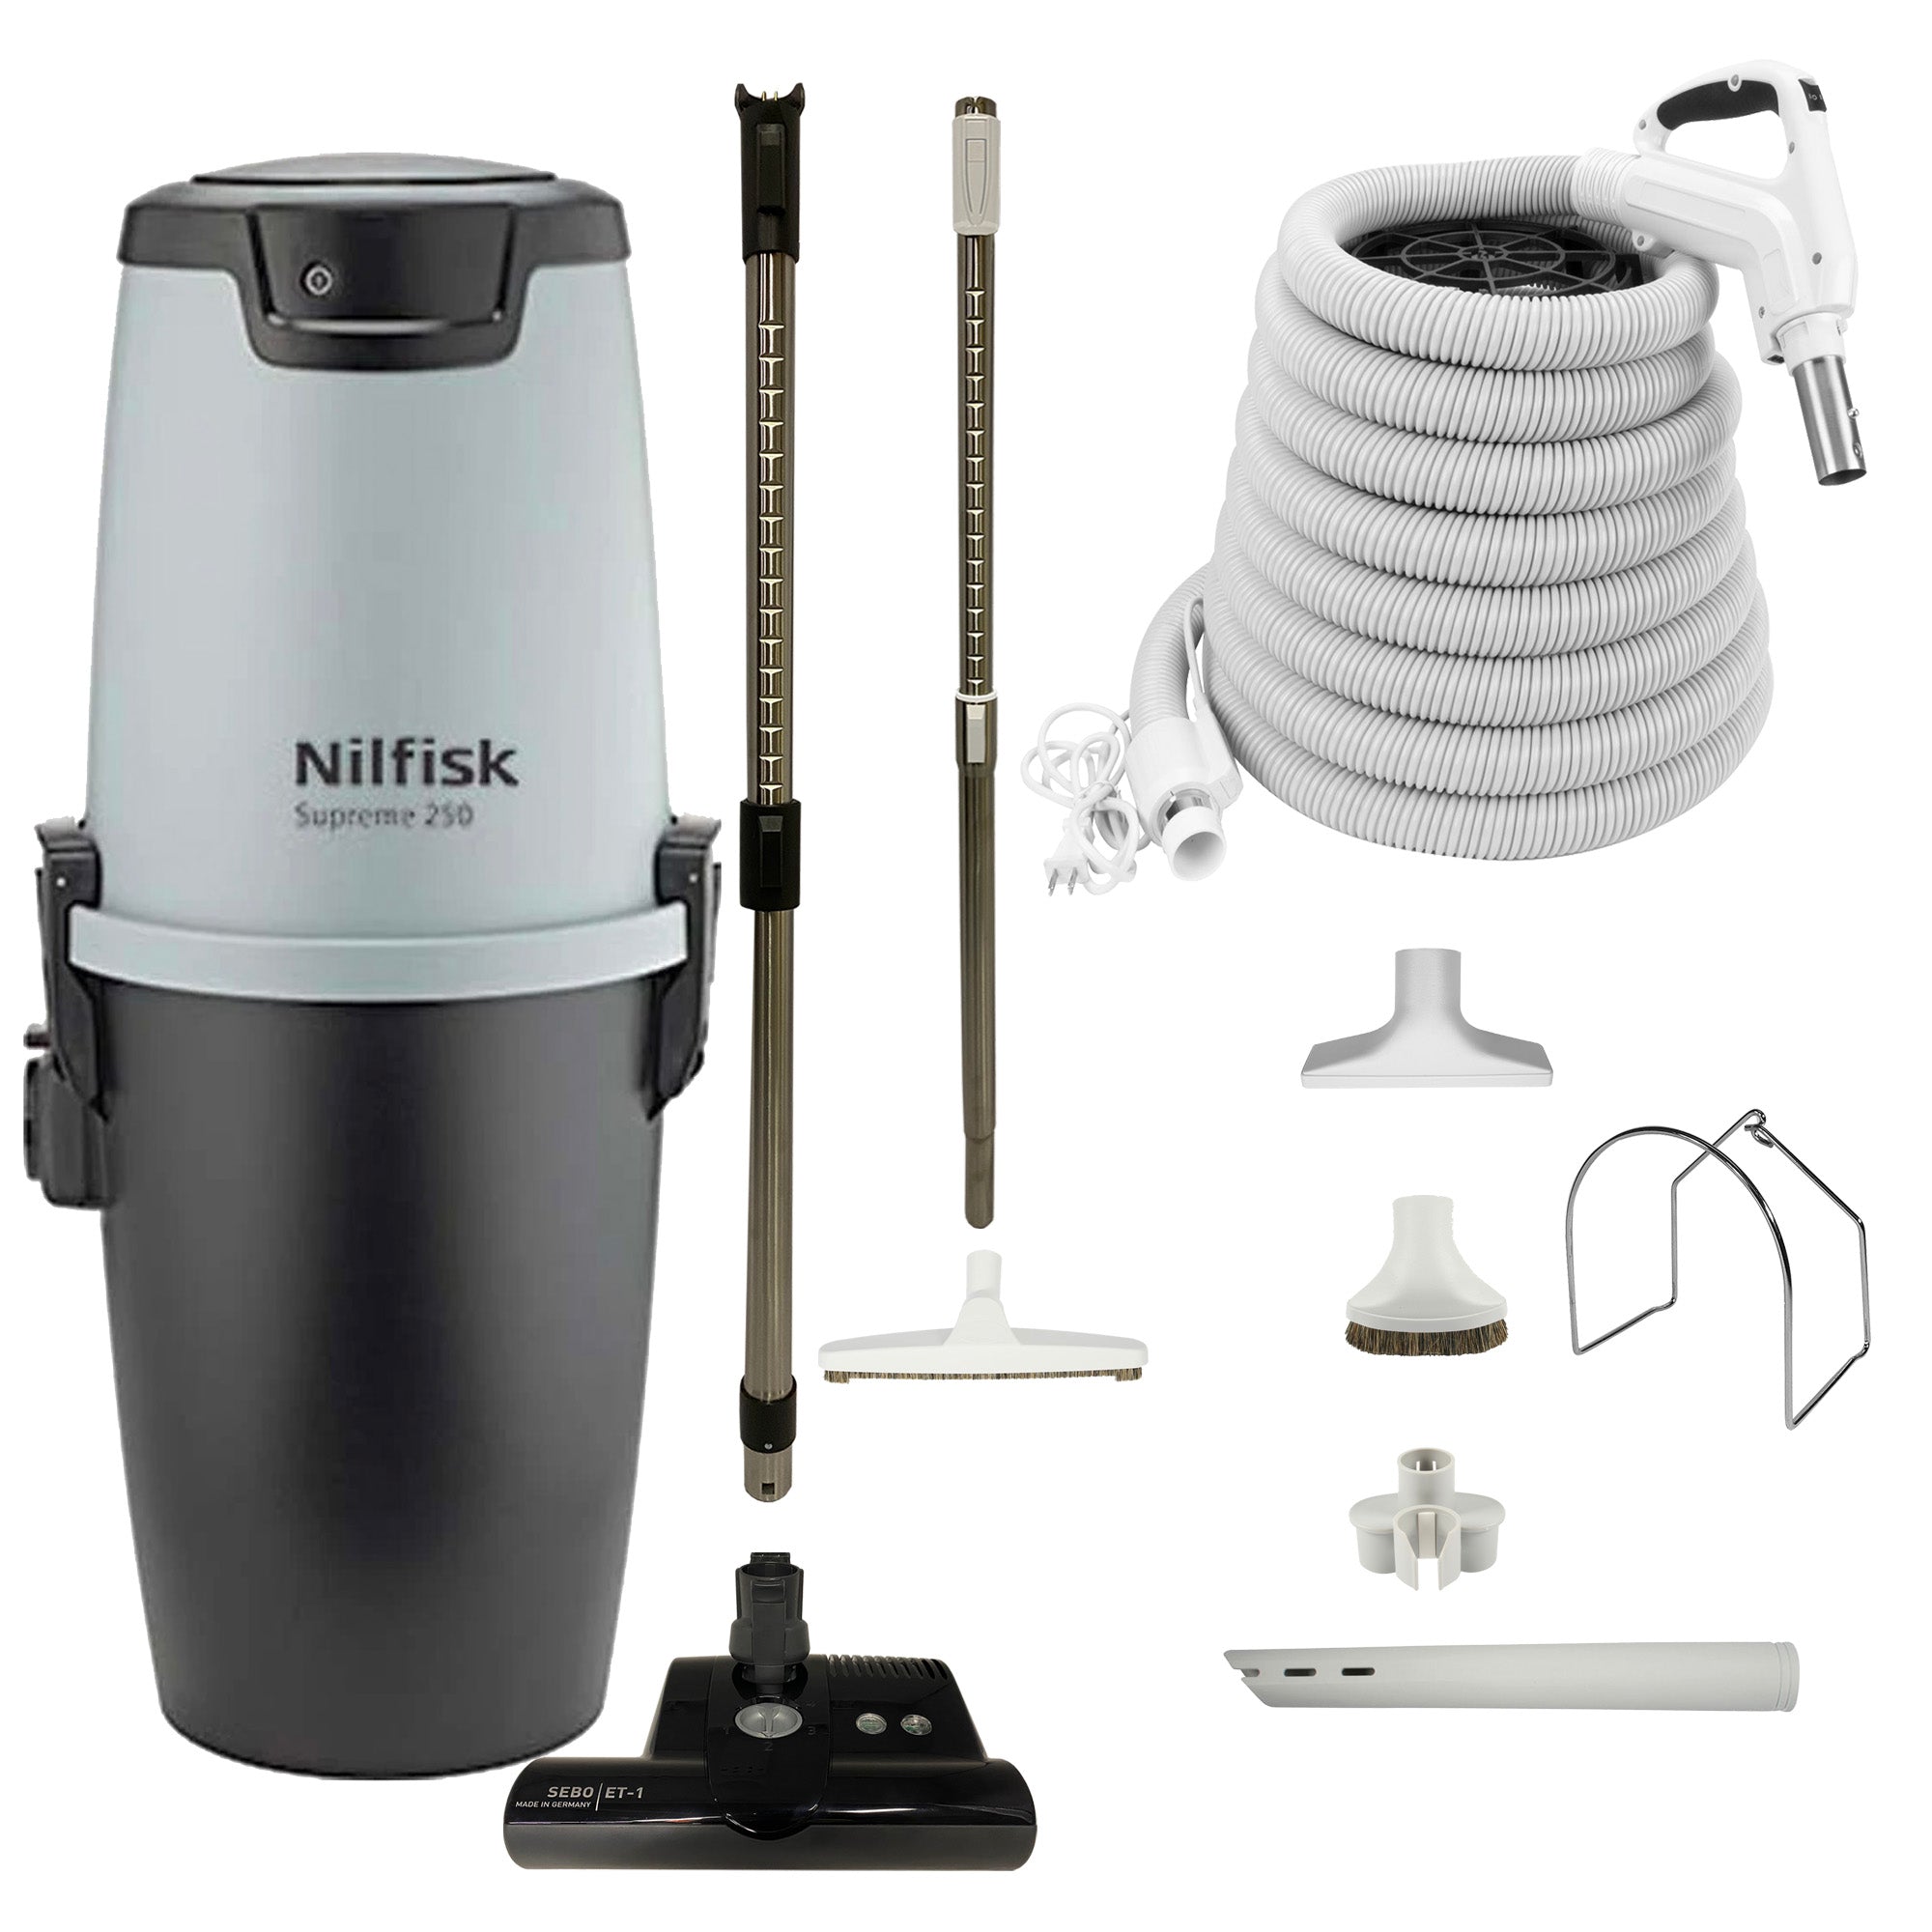 Nilfisk Supreme 250 Central Vacuum with SEBO ET-1 Electric Powerhead and Premium Electric Package - White